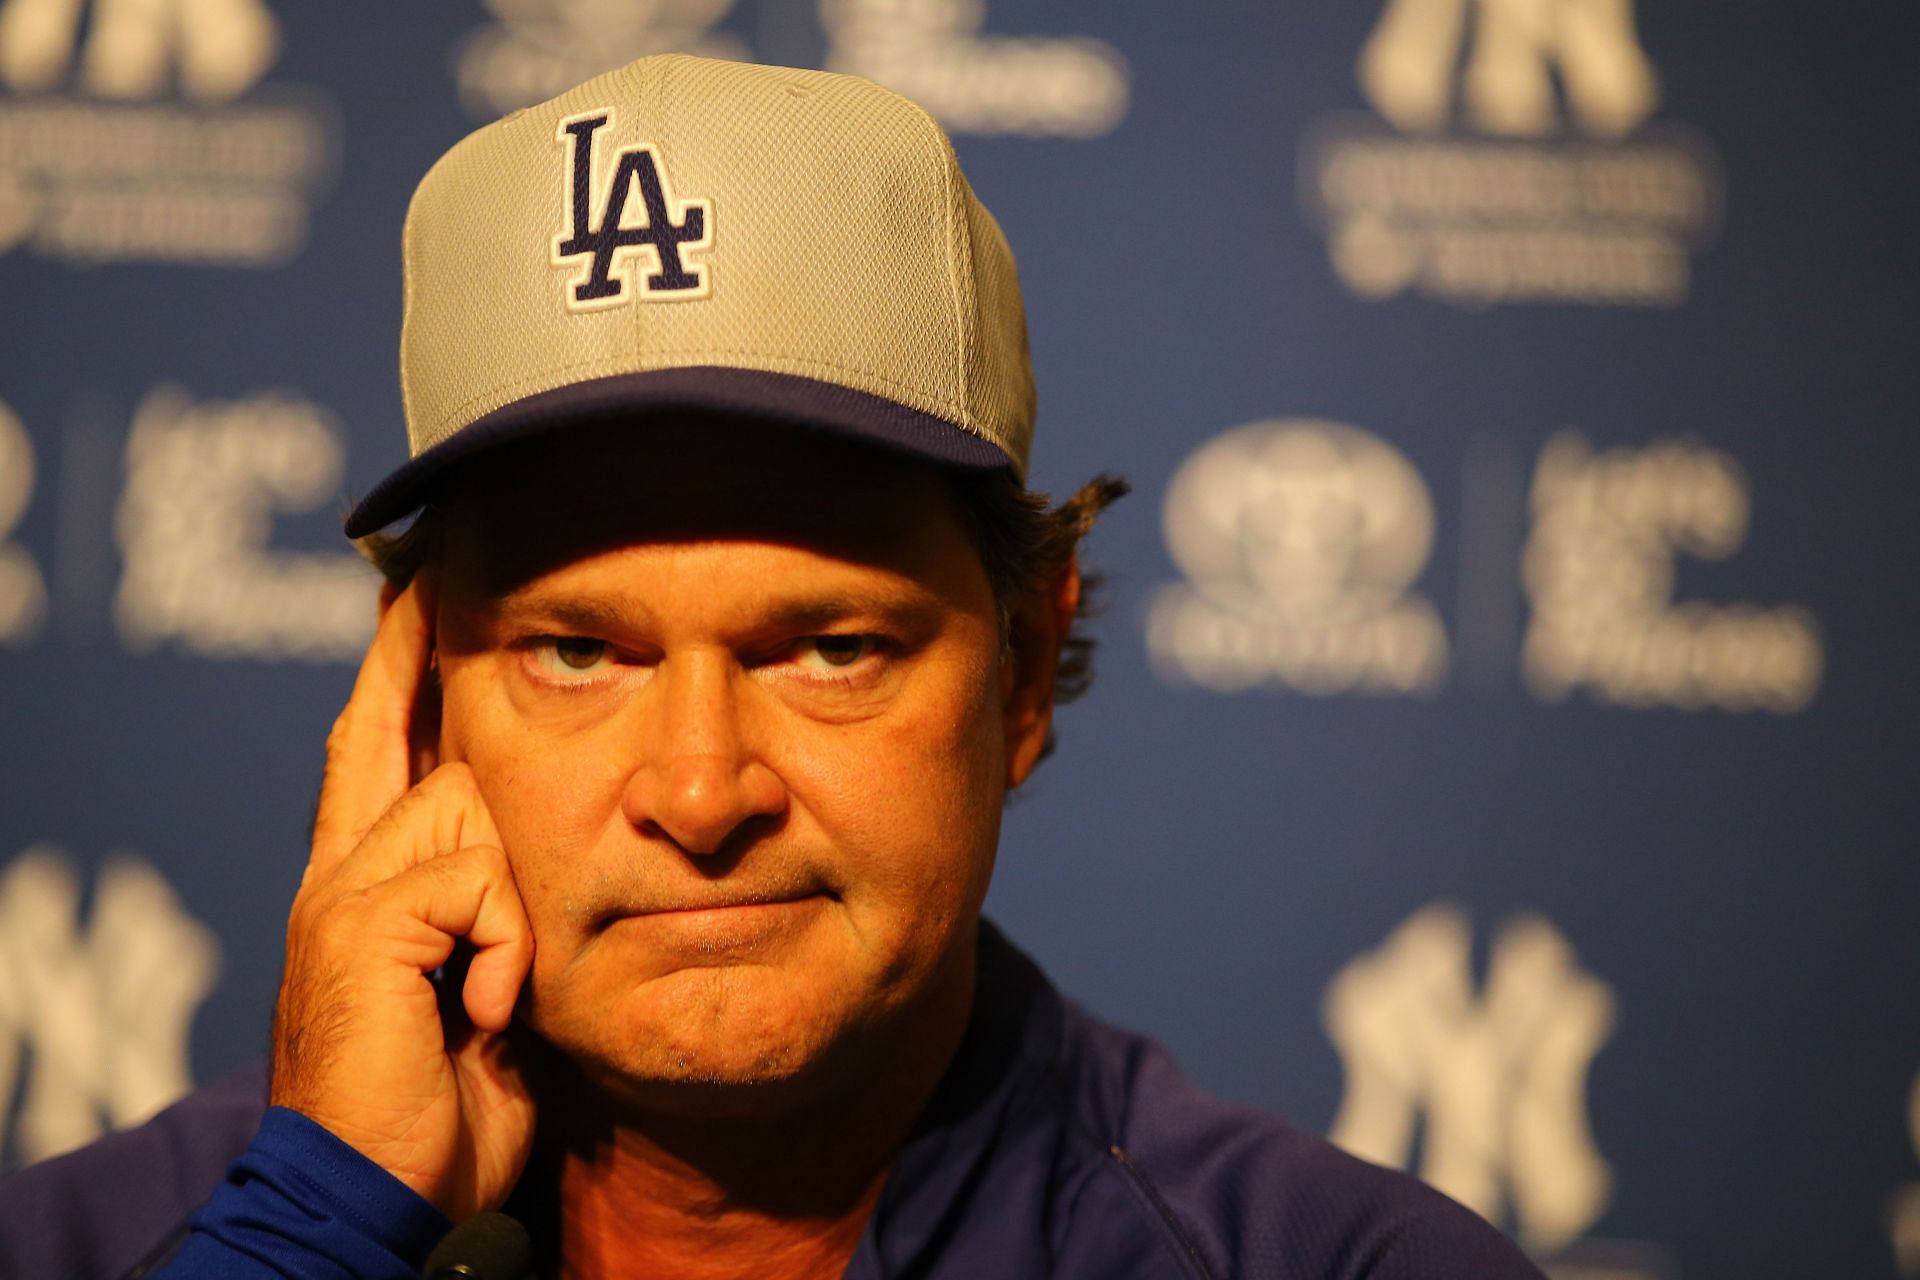 Yankees legend Don Mattingly discusses new role with Jays - Video